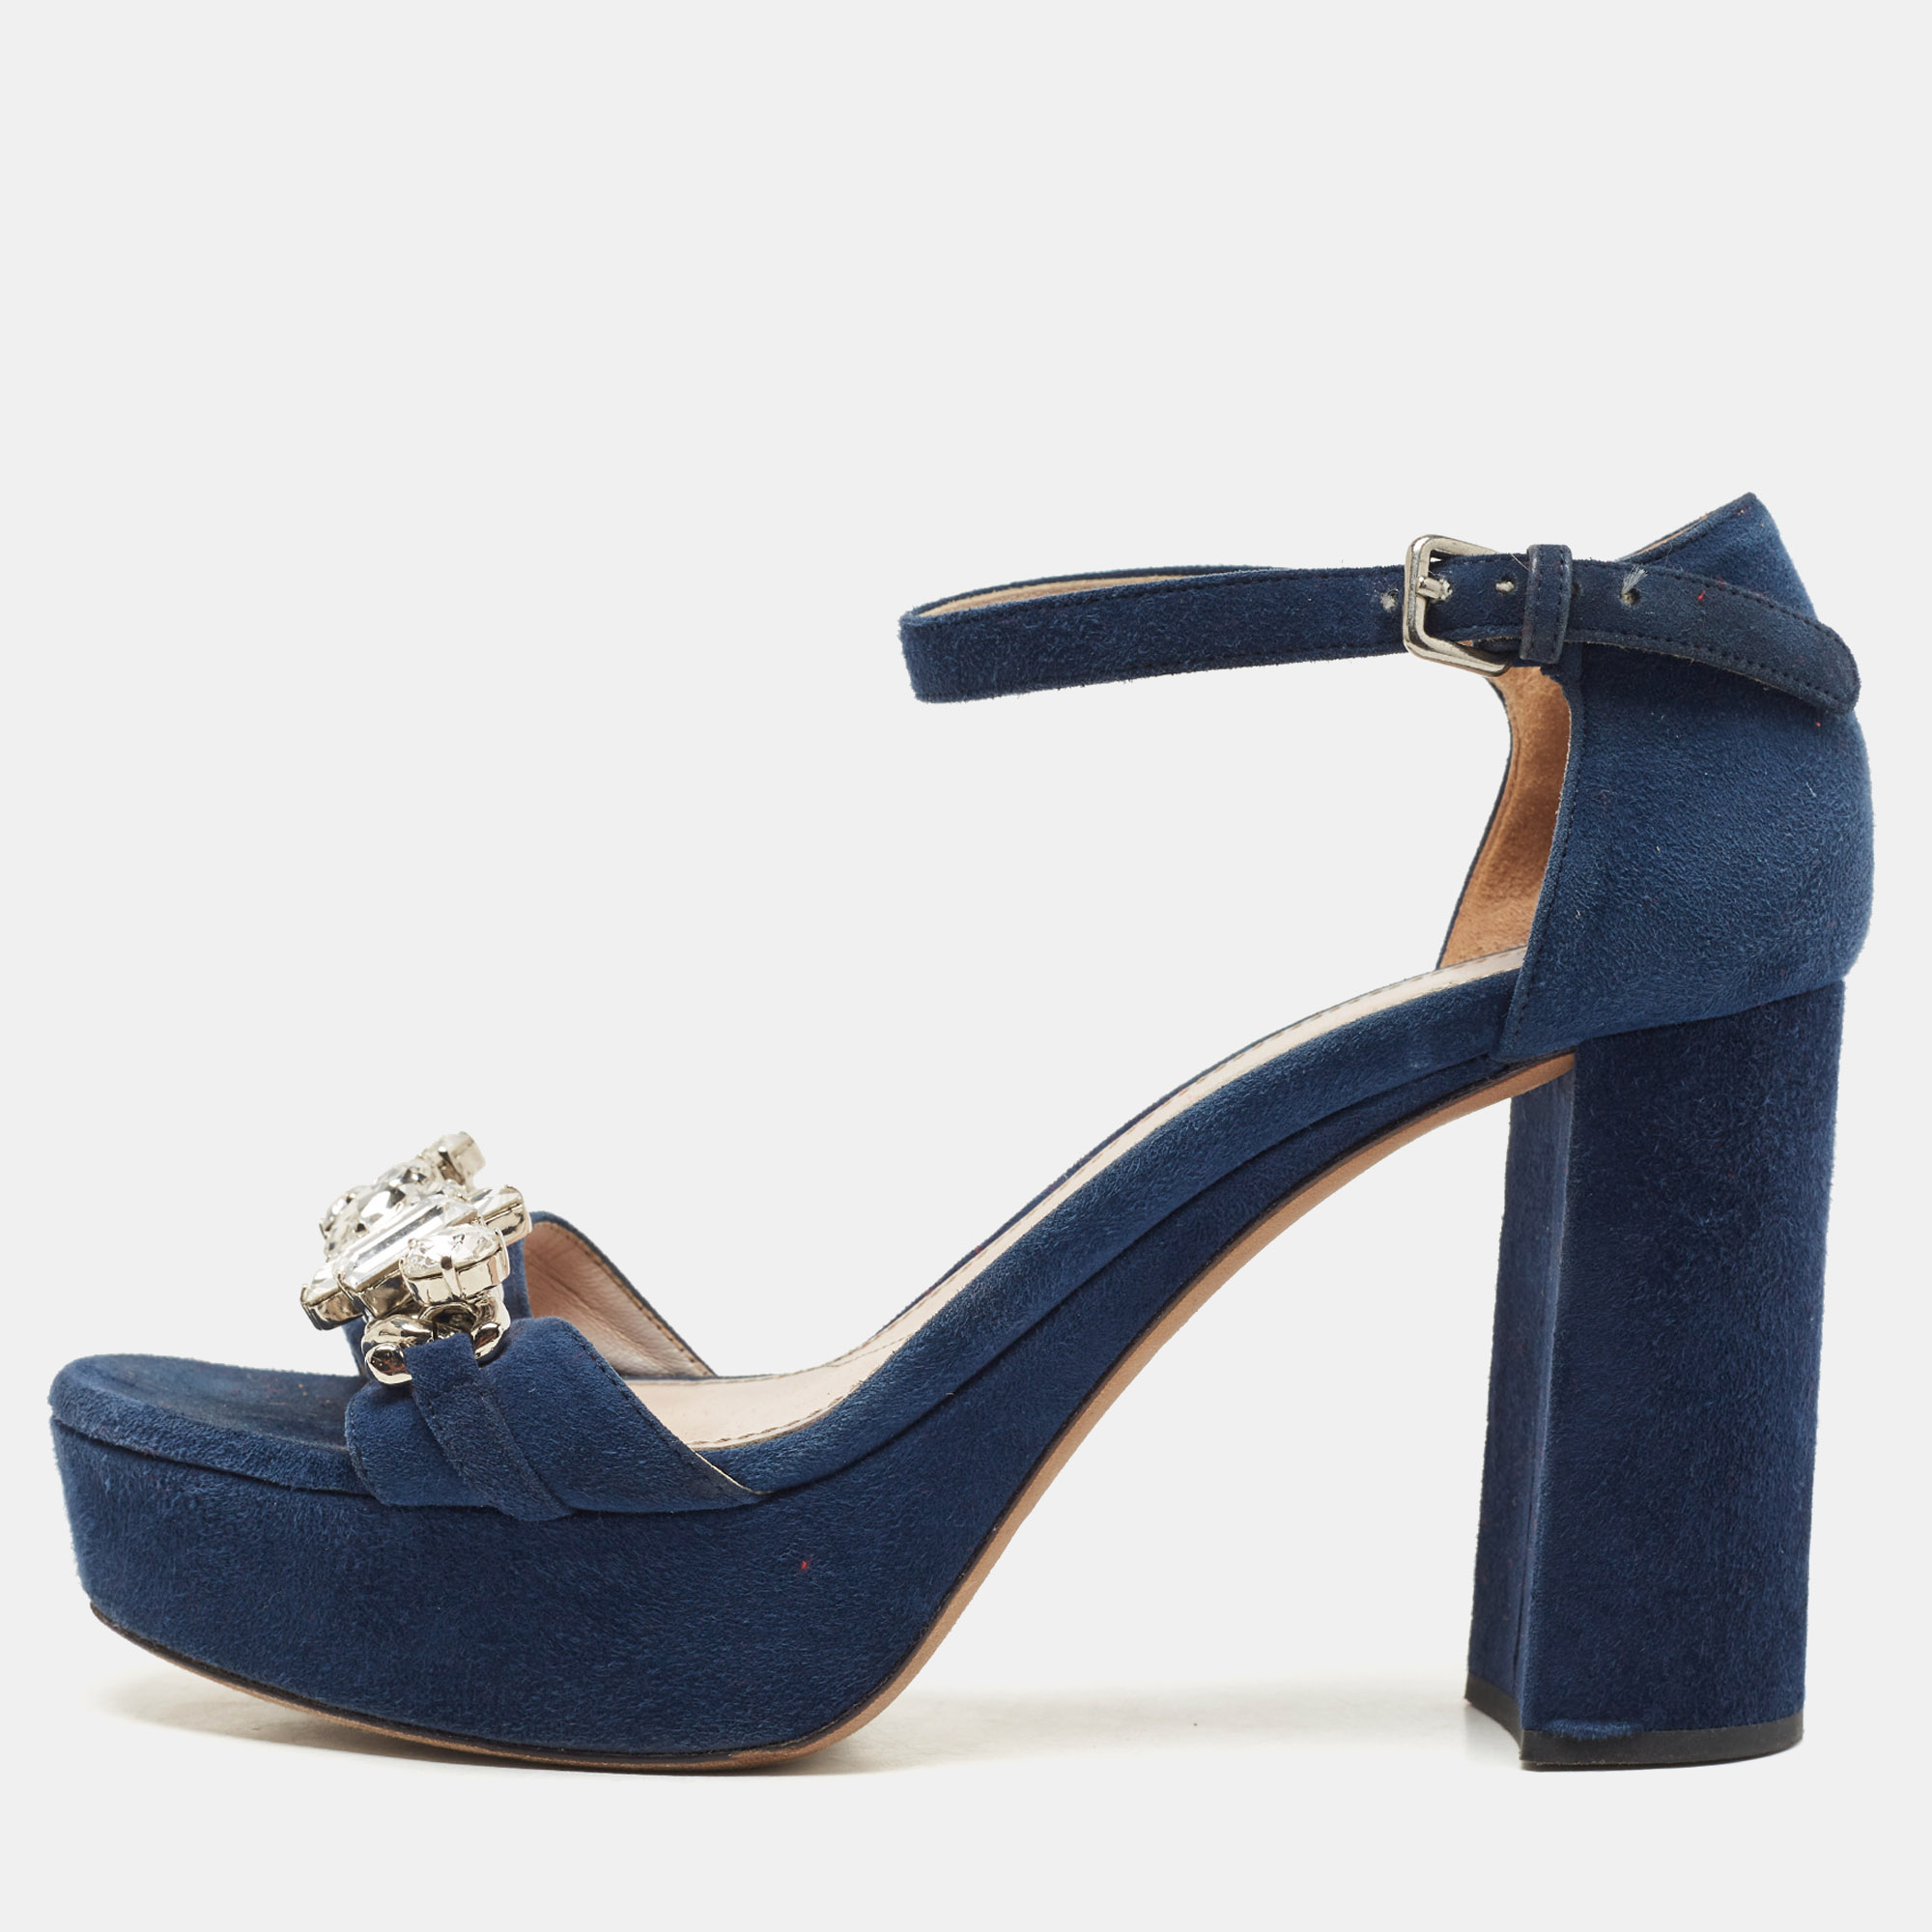 Pre-owned Miu Miu Navy Blue Suede Crystal Embellished Ankle Strap Sandals Size 37.5